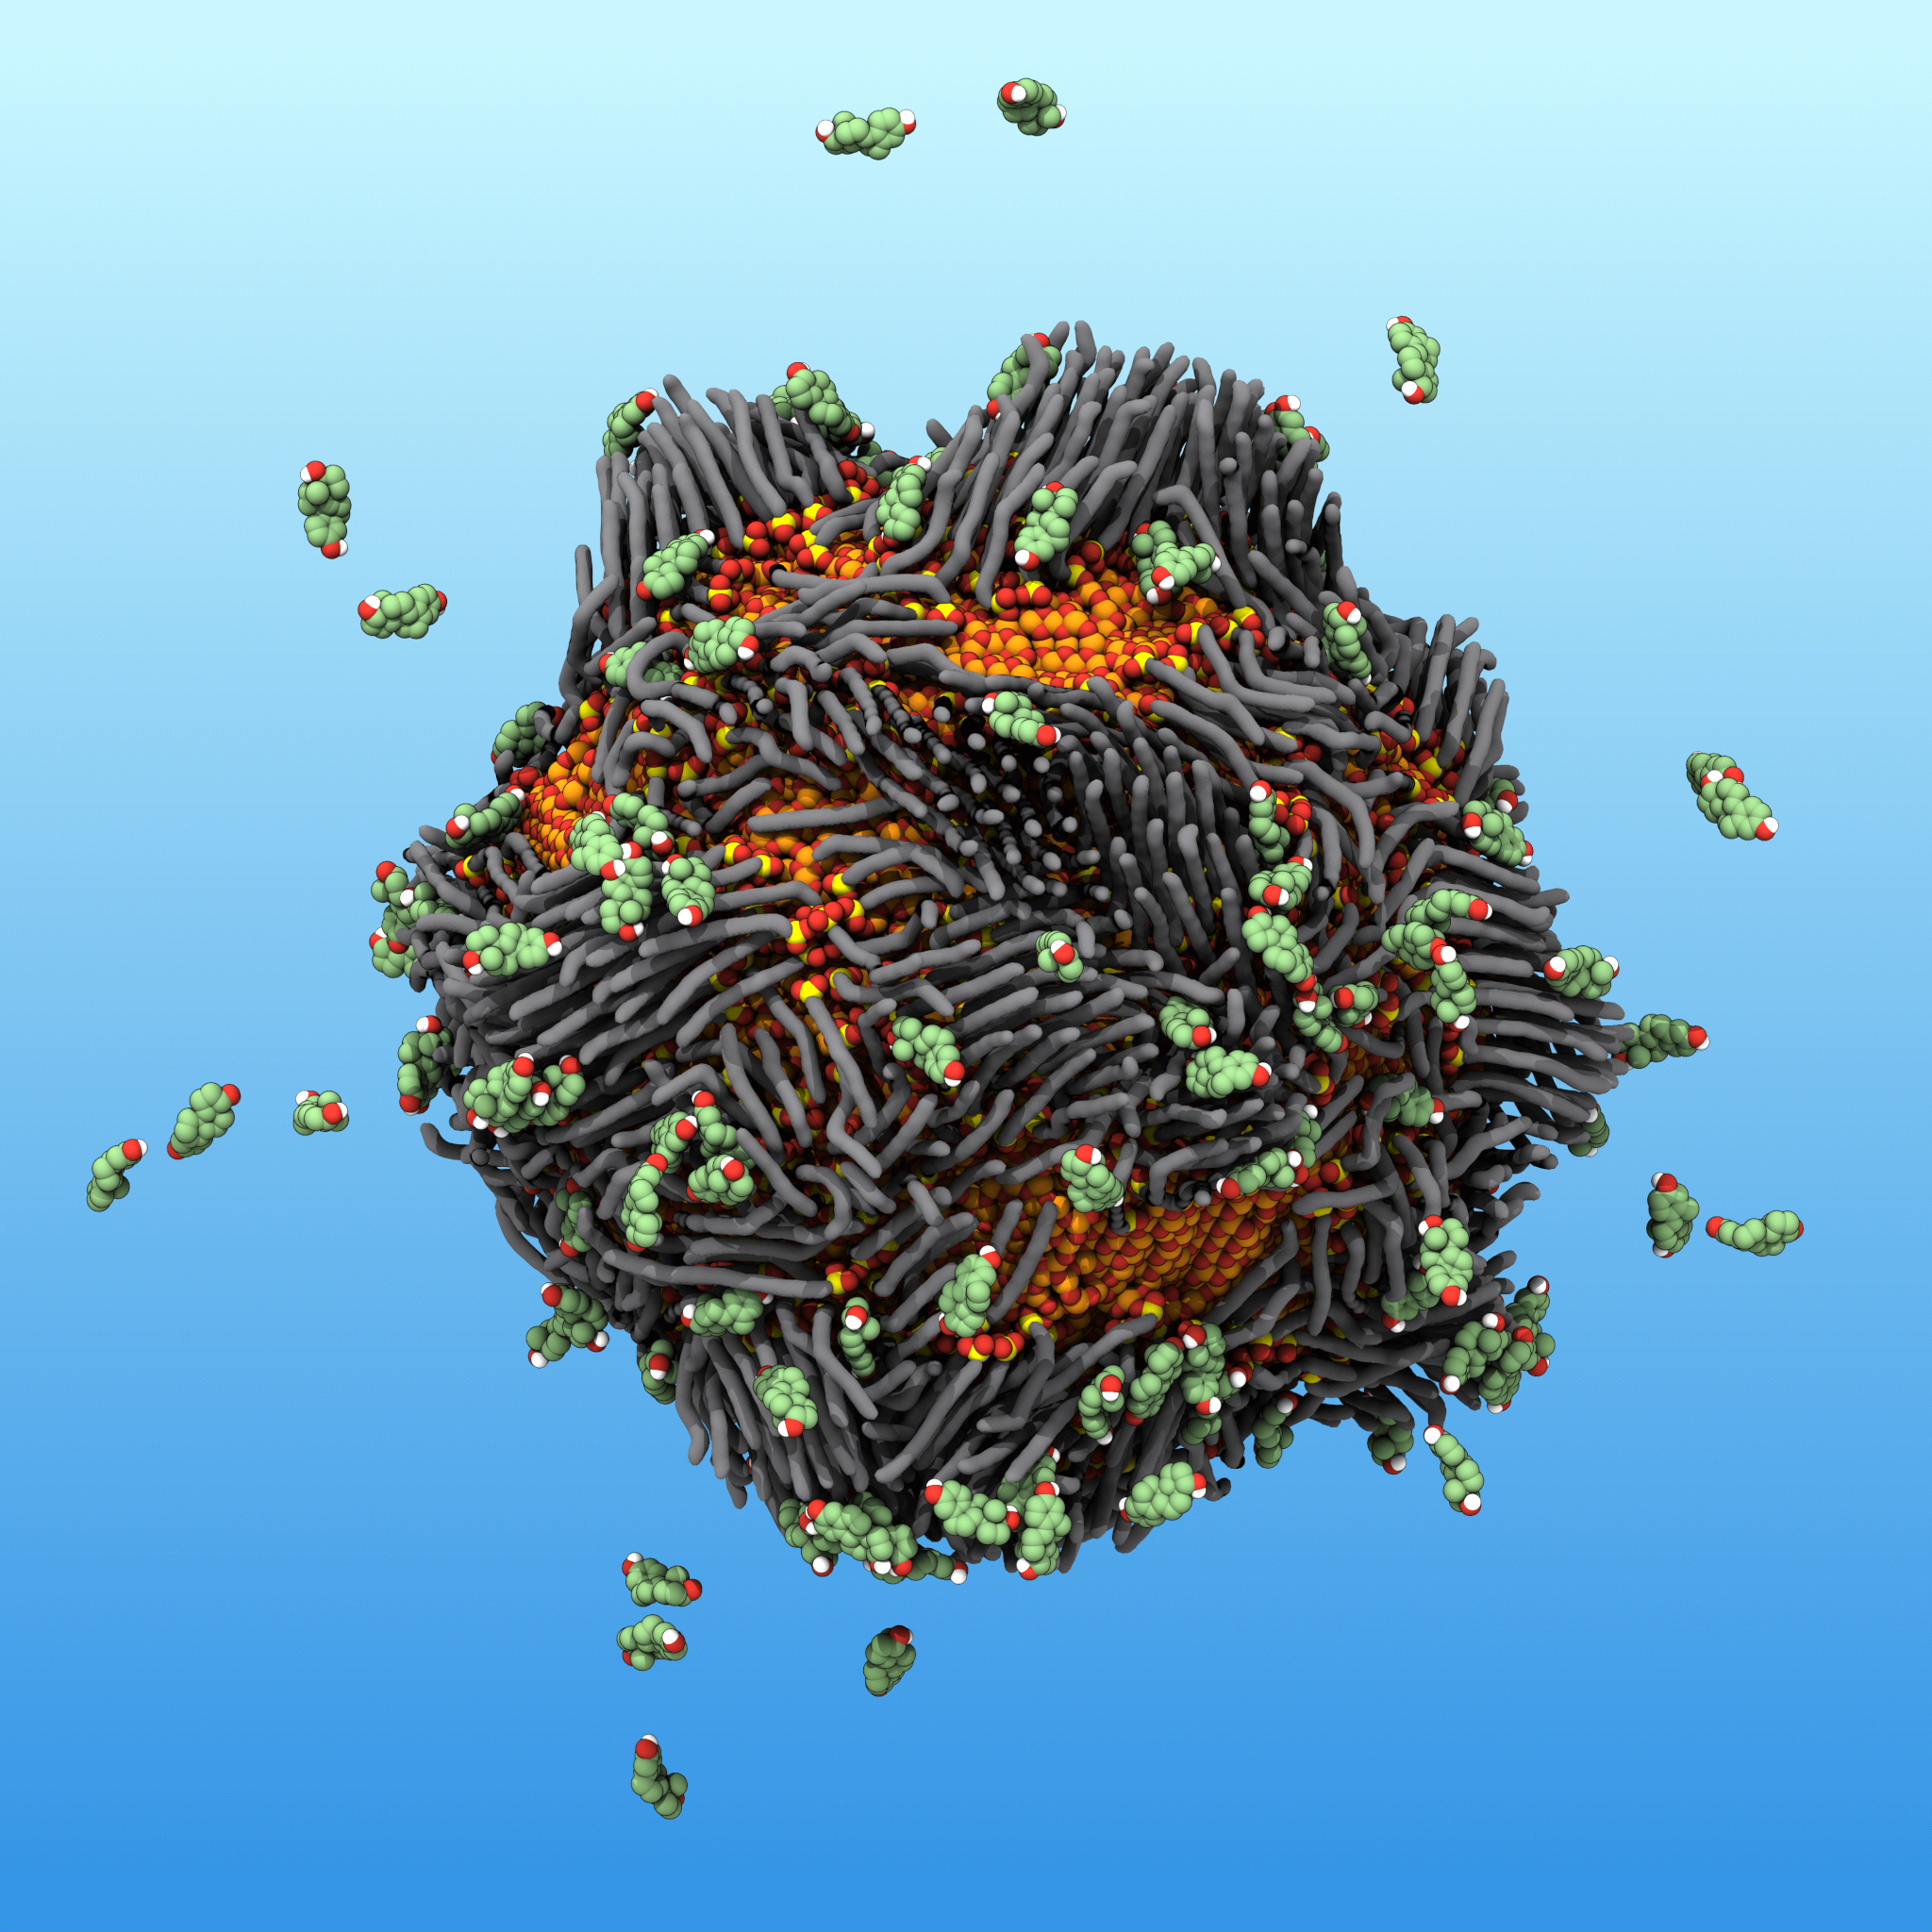 In this illustration, a “smart rust” nanoparticle attracts and traps estrogen molecules, which are represented by the floating objects.